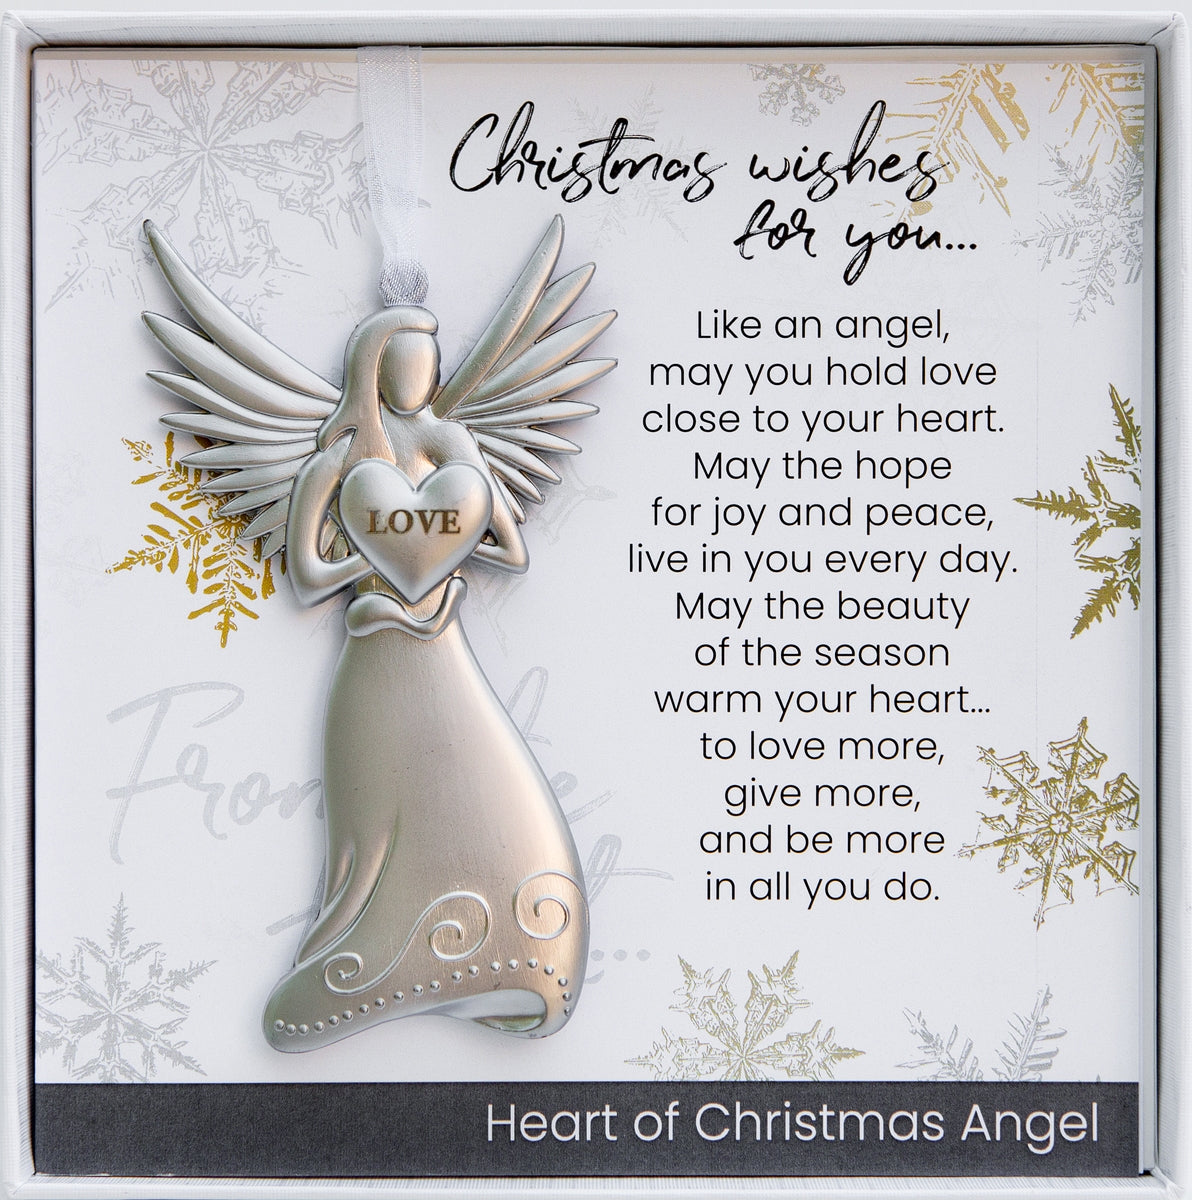 Christmas Angel Gift - silver toned 4" metal hanging angel ornament with Christmas sentiment card, boxed in white box with clear lid